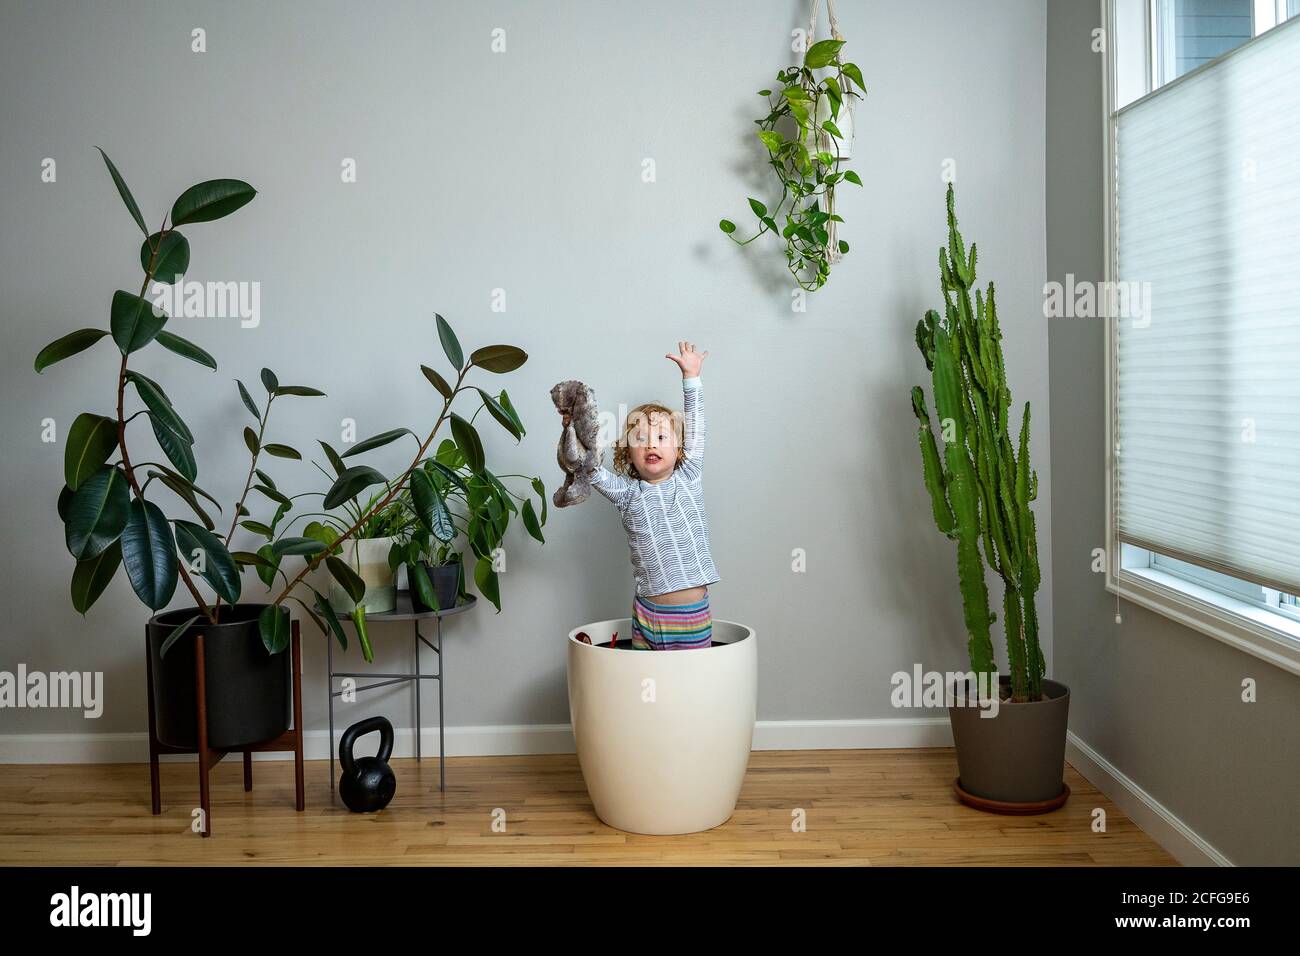 Young child holding a stuffed toy rabbit stretches arms above head while standing in a large plant pot Stock Photo